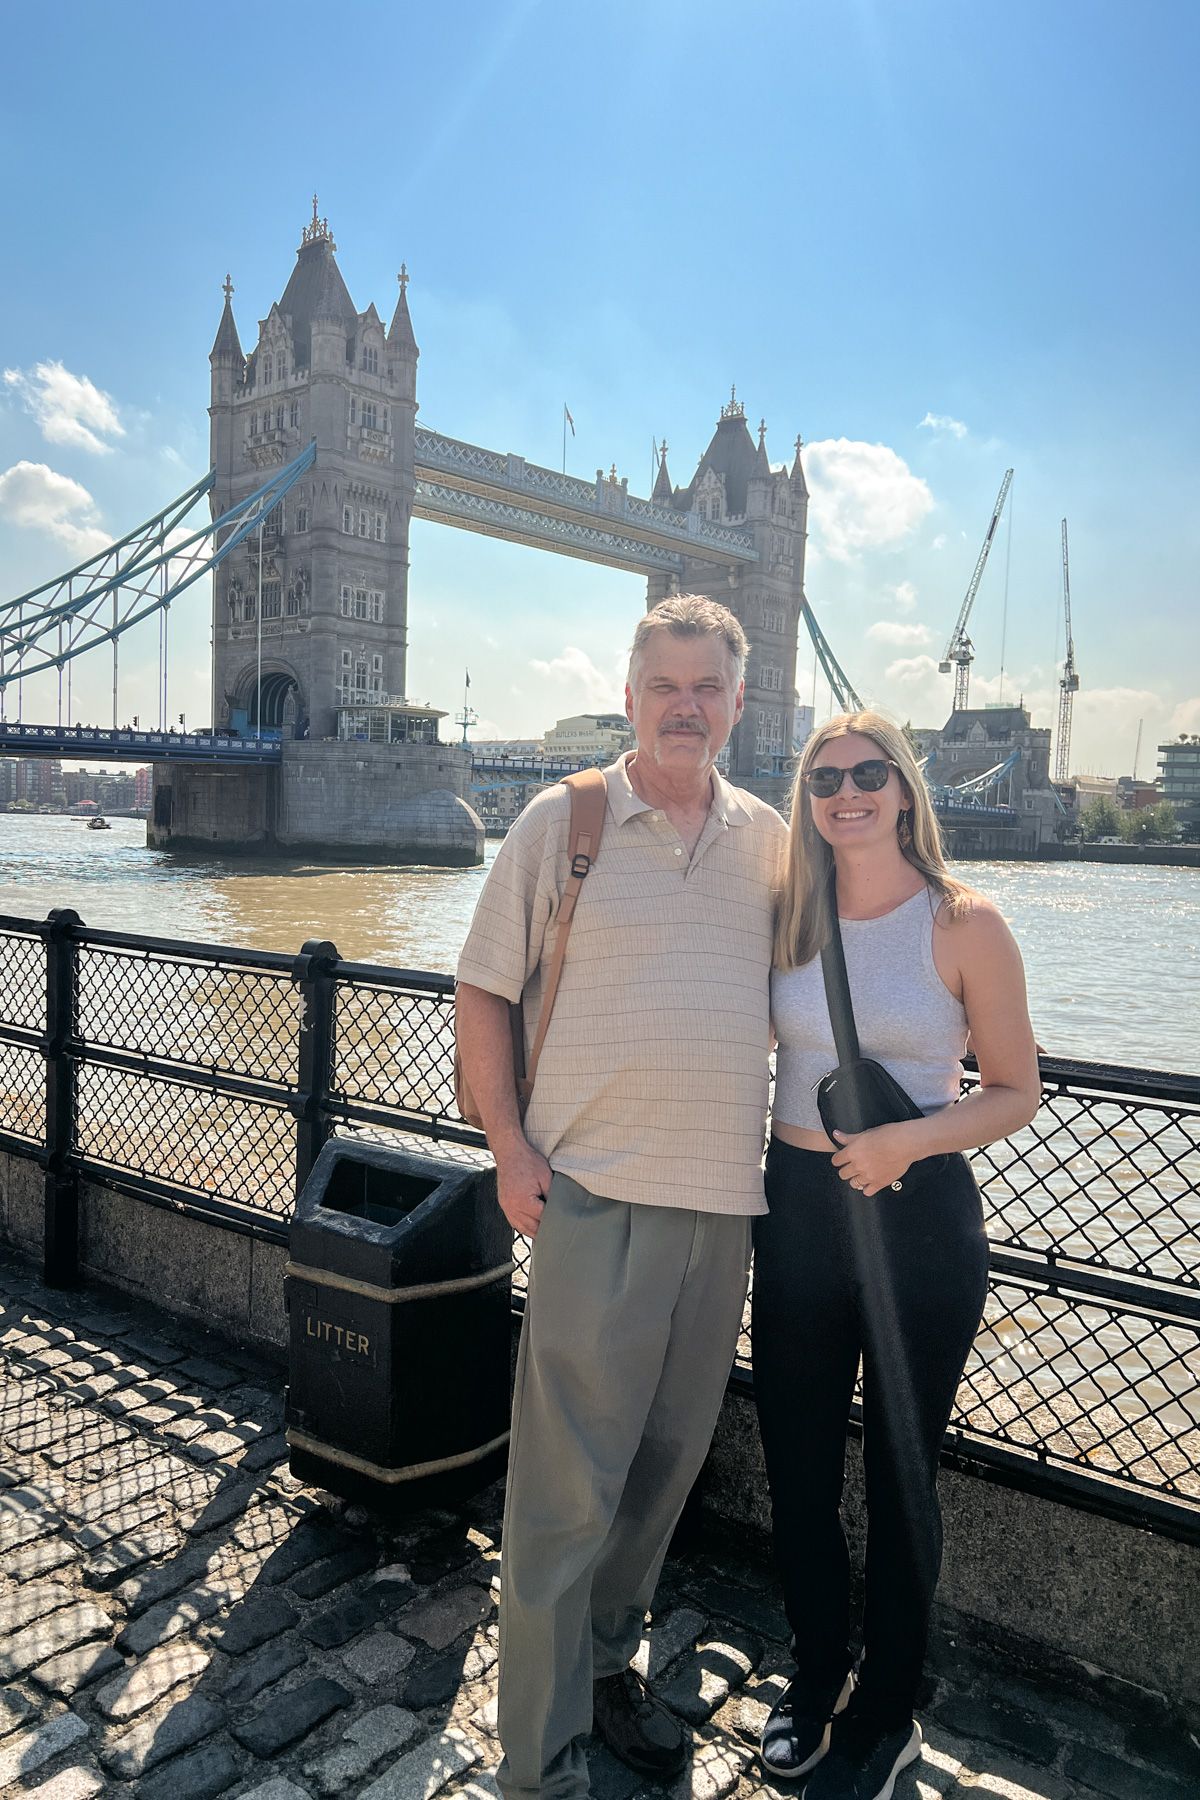 An older man in a white t-shirt stands next to a young woman in black pants and a white tank top in front of the London Bridge on a sunny day.